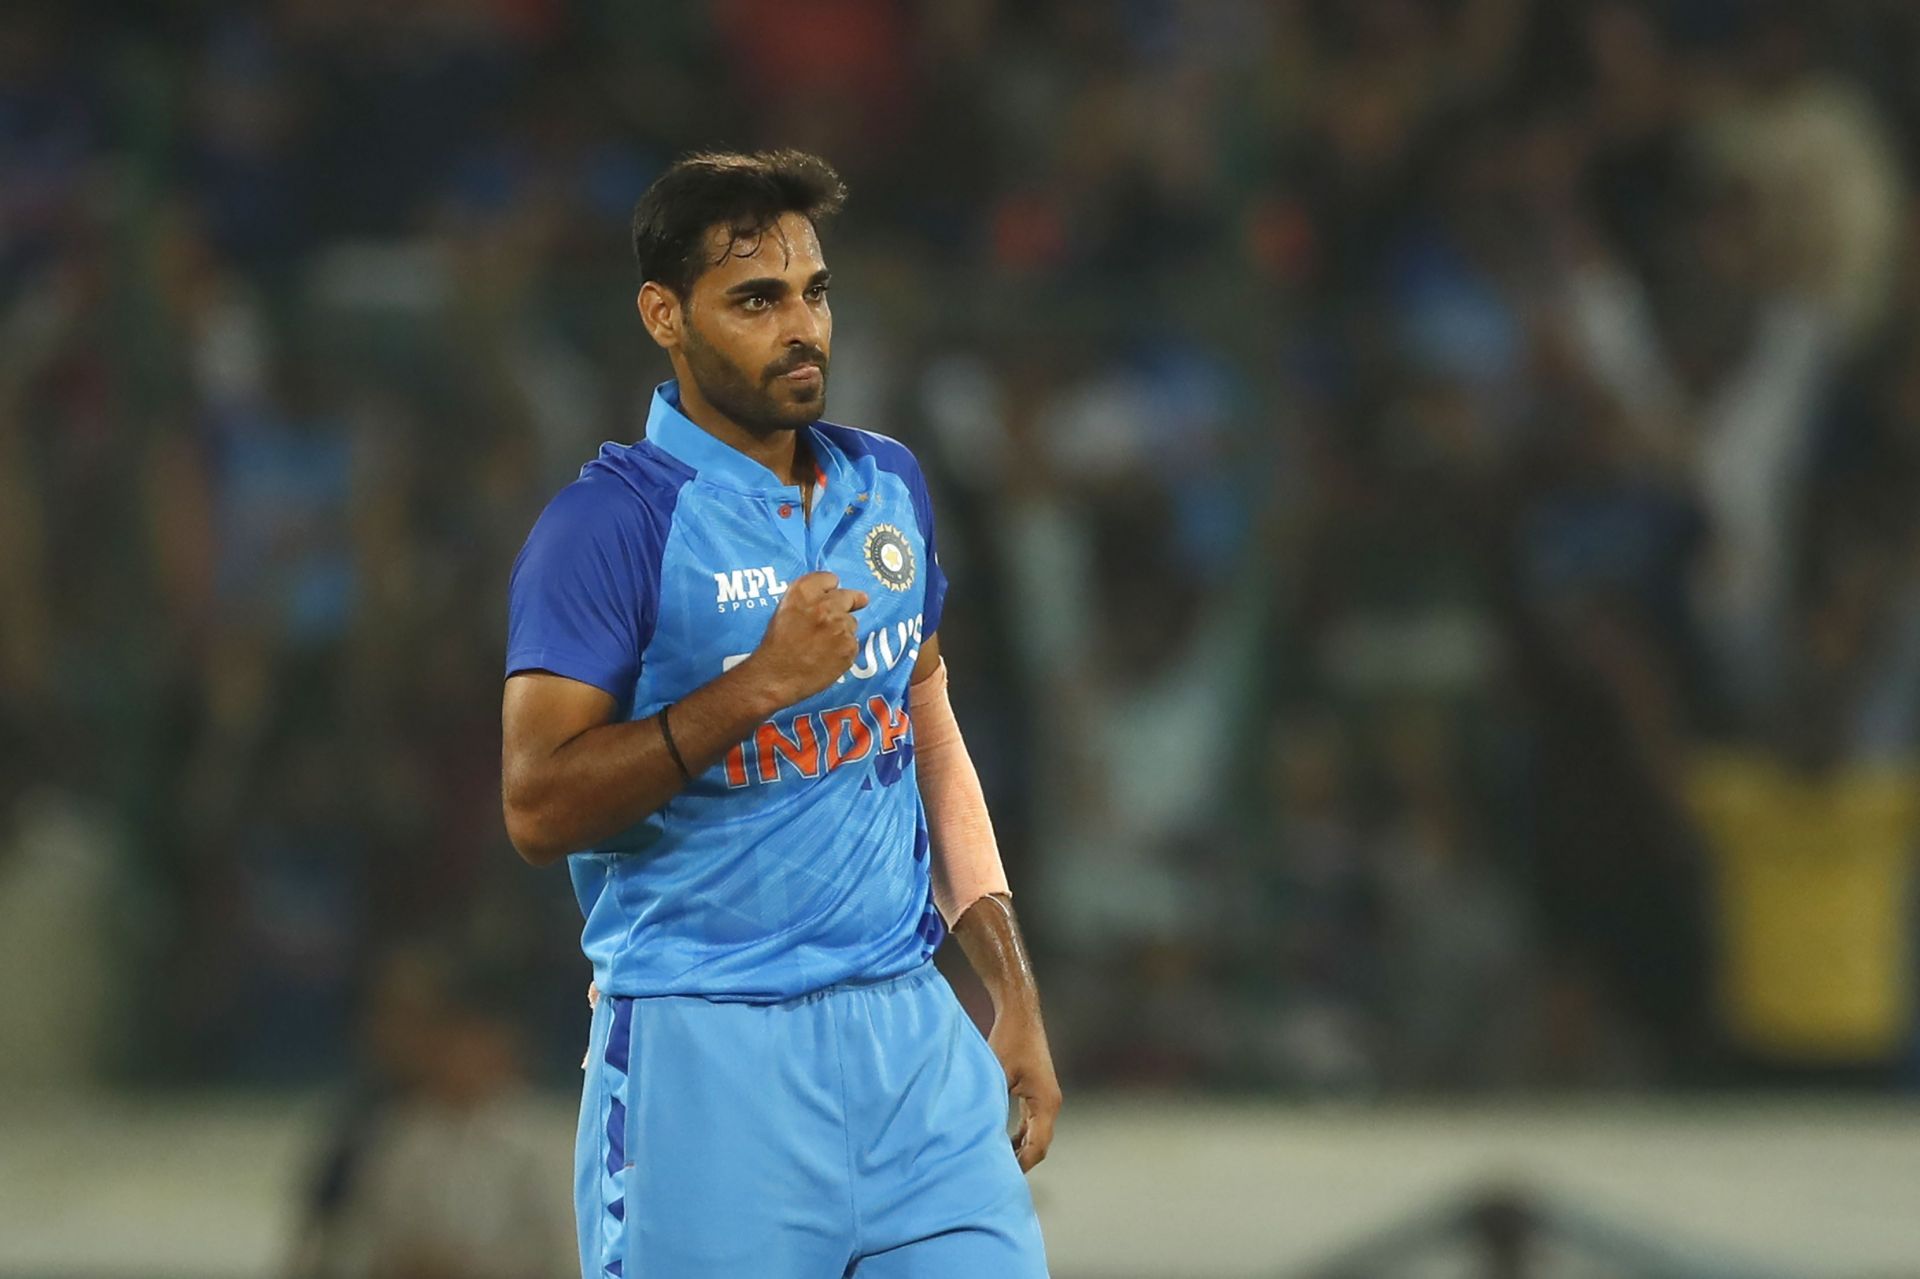 Bhuvneshwar Kumar has been found wanting in the death overs in recent times.